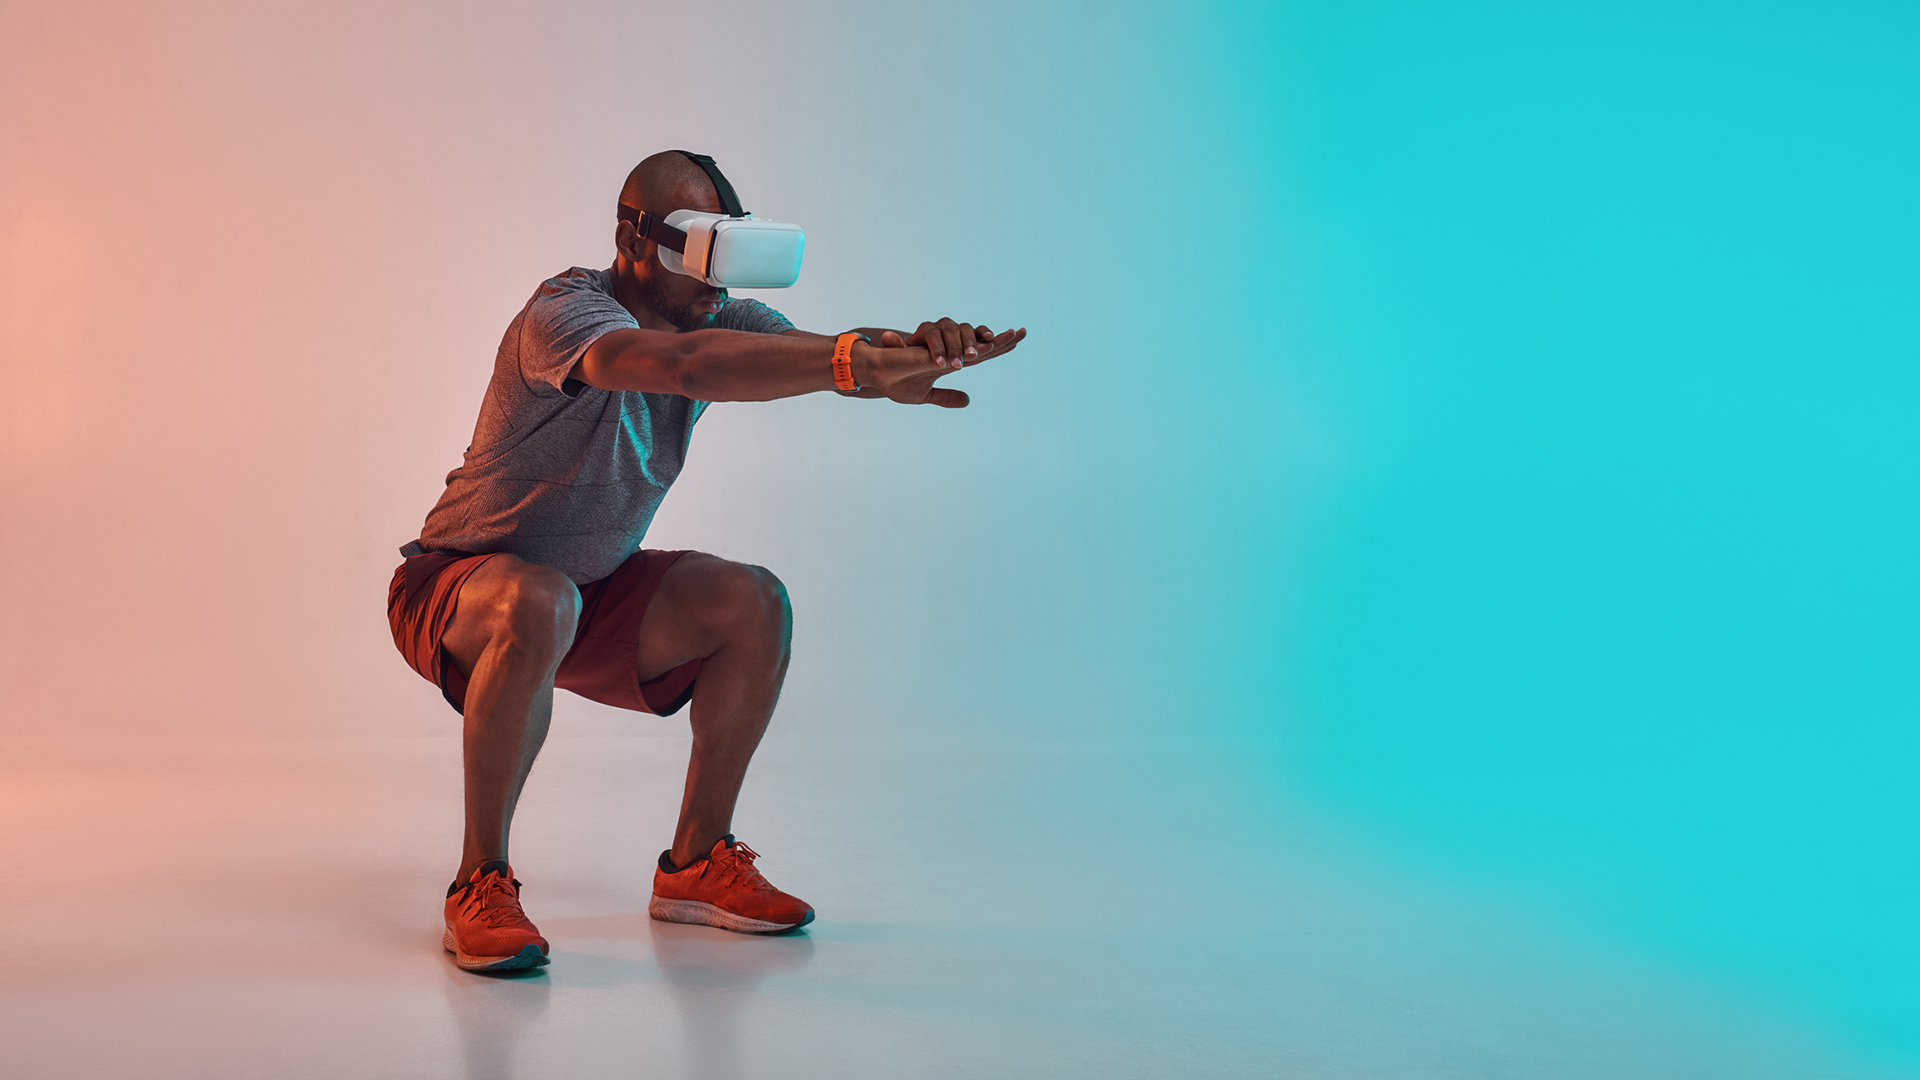 VR technology and 3D capture could allow physiotherapy at home